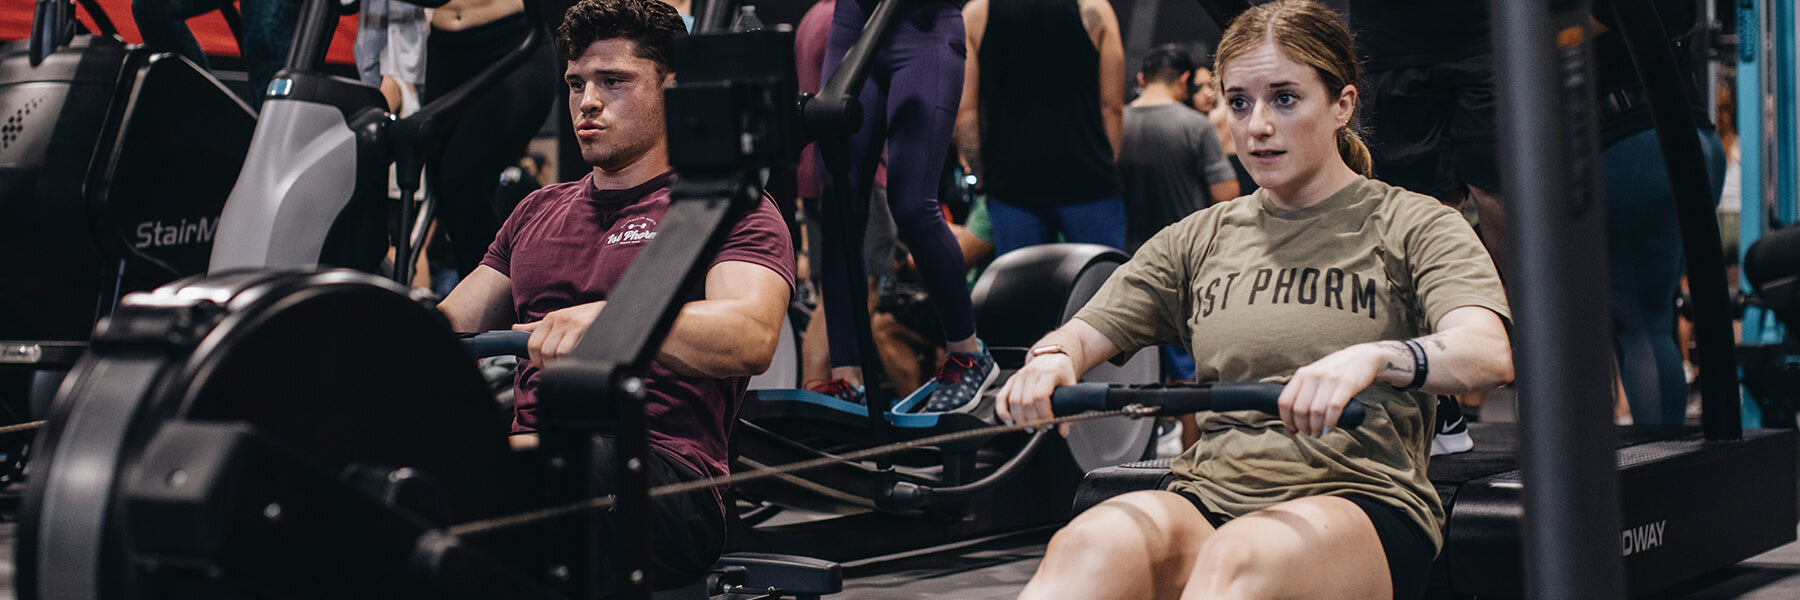 What Are the Benefits of Rowing? | 1st Phorm